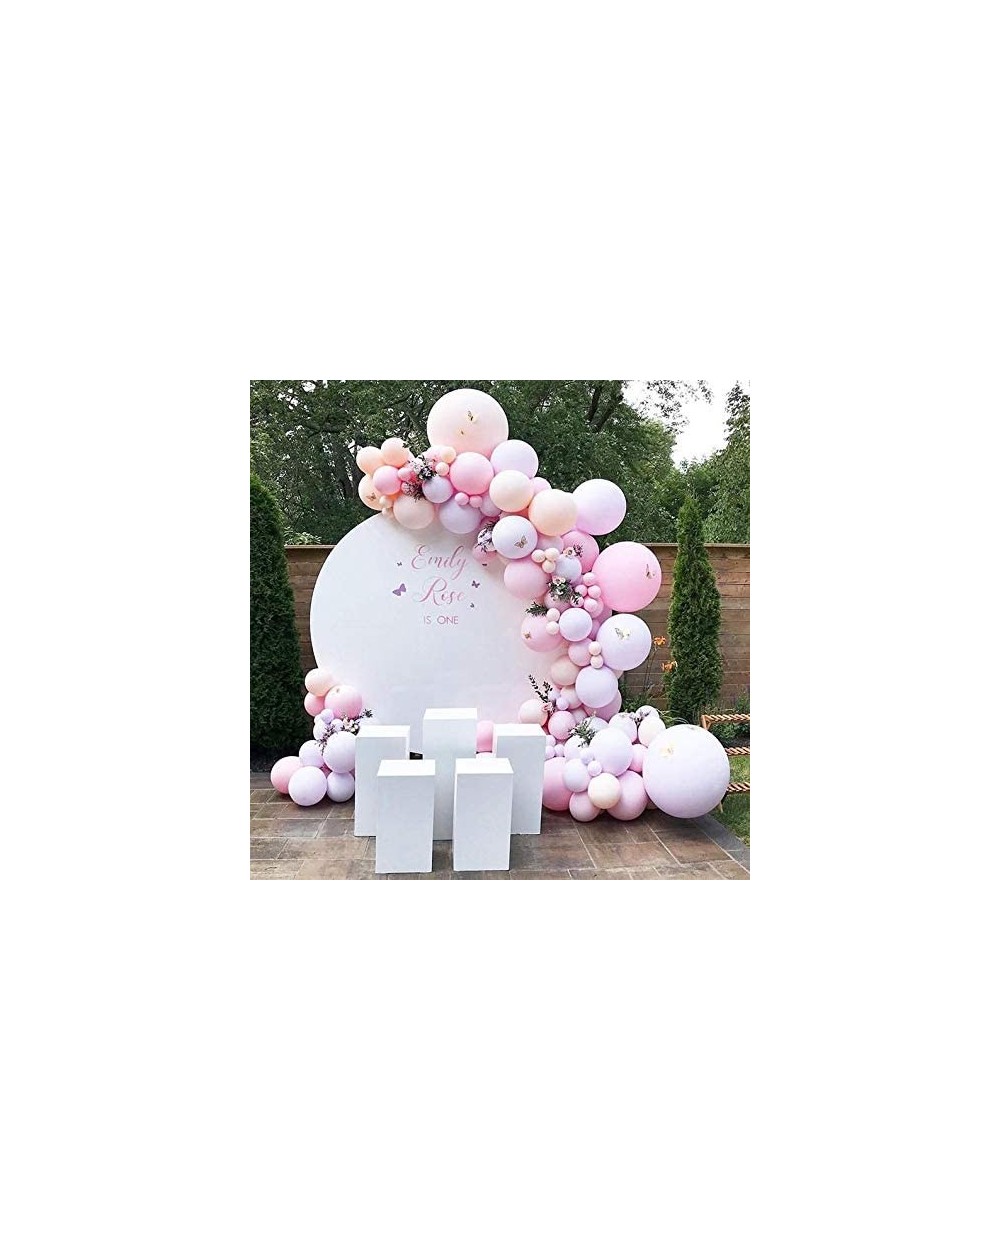 Balloons Pastel Pink Balloon Garland Arch Kit-Orange Macaron Balloons Peach Pink Macaron Balloons 134Pcs for Birthday of The ...